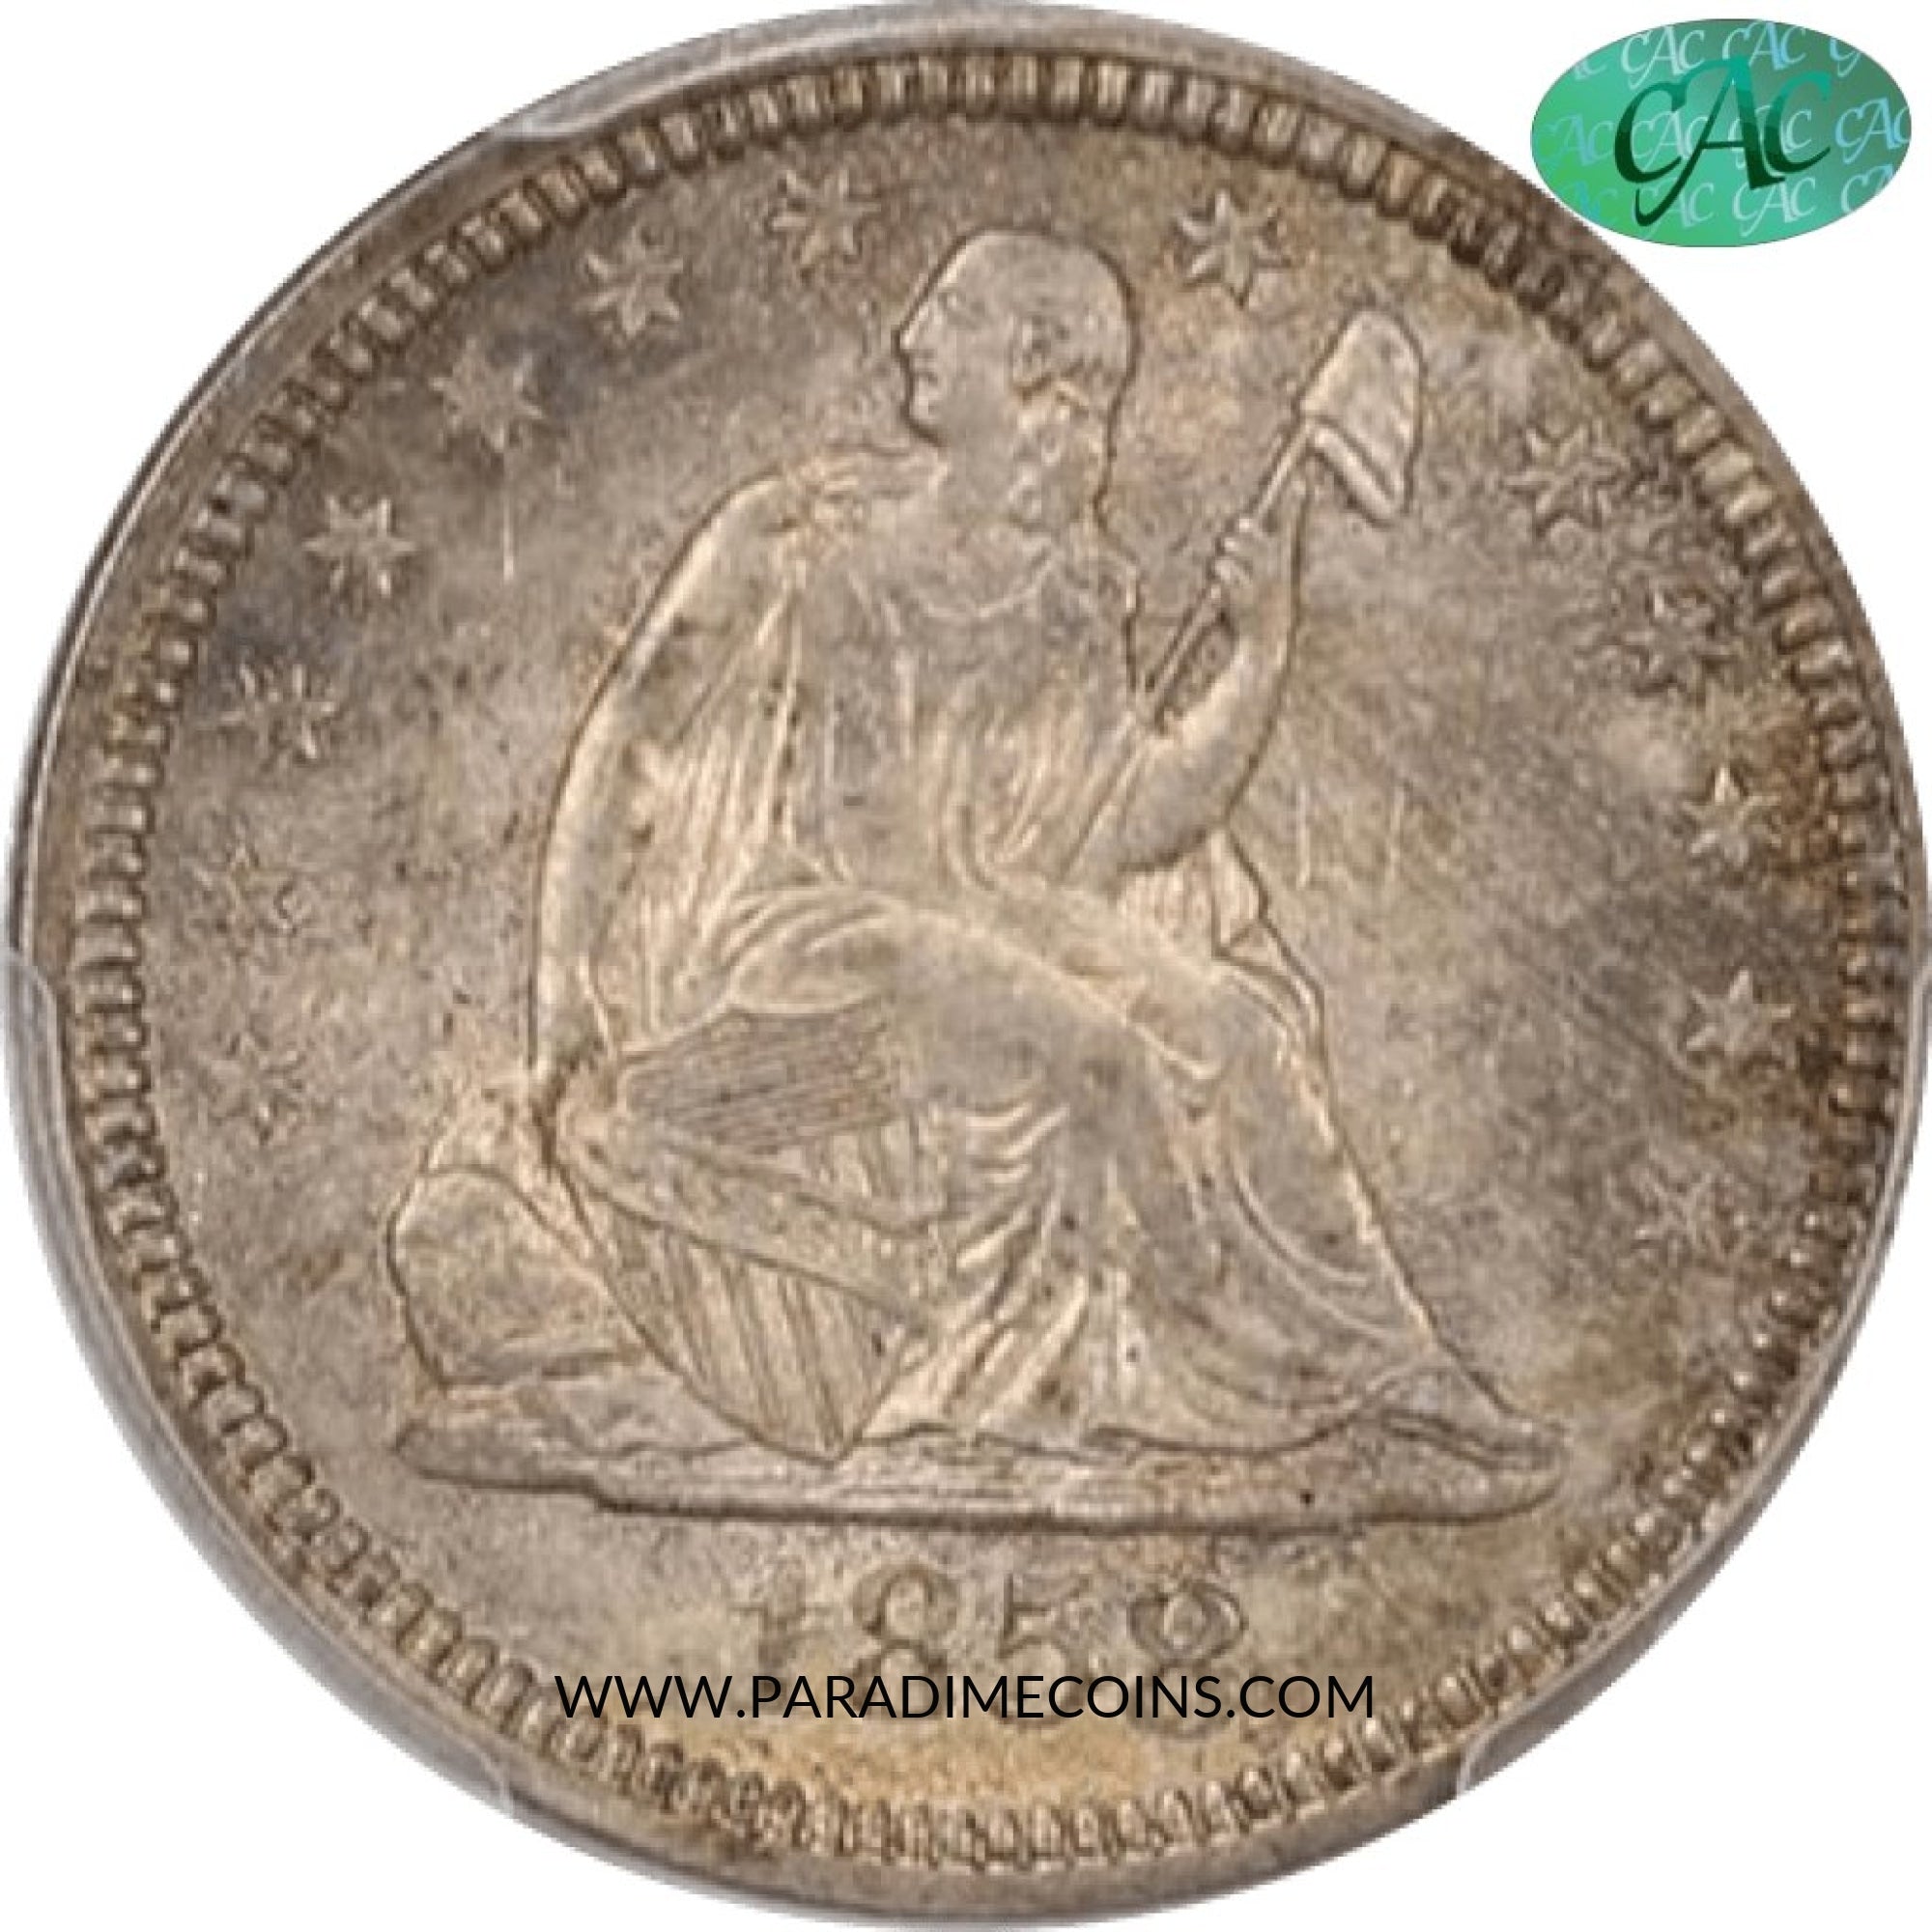 1858 25C MS66 PCGS CAC - Paradime Coins | PCGS NGC CACG CAC Rare US Numismatic Coins For Sale